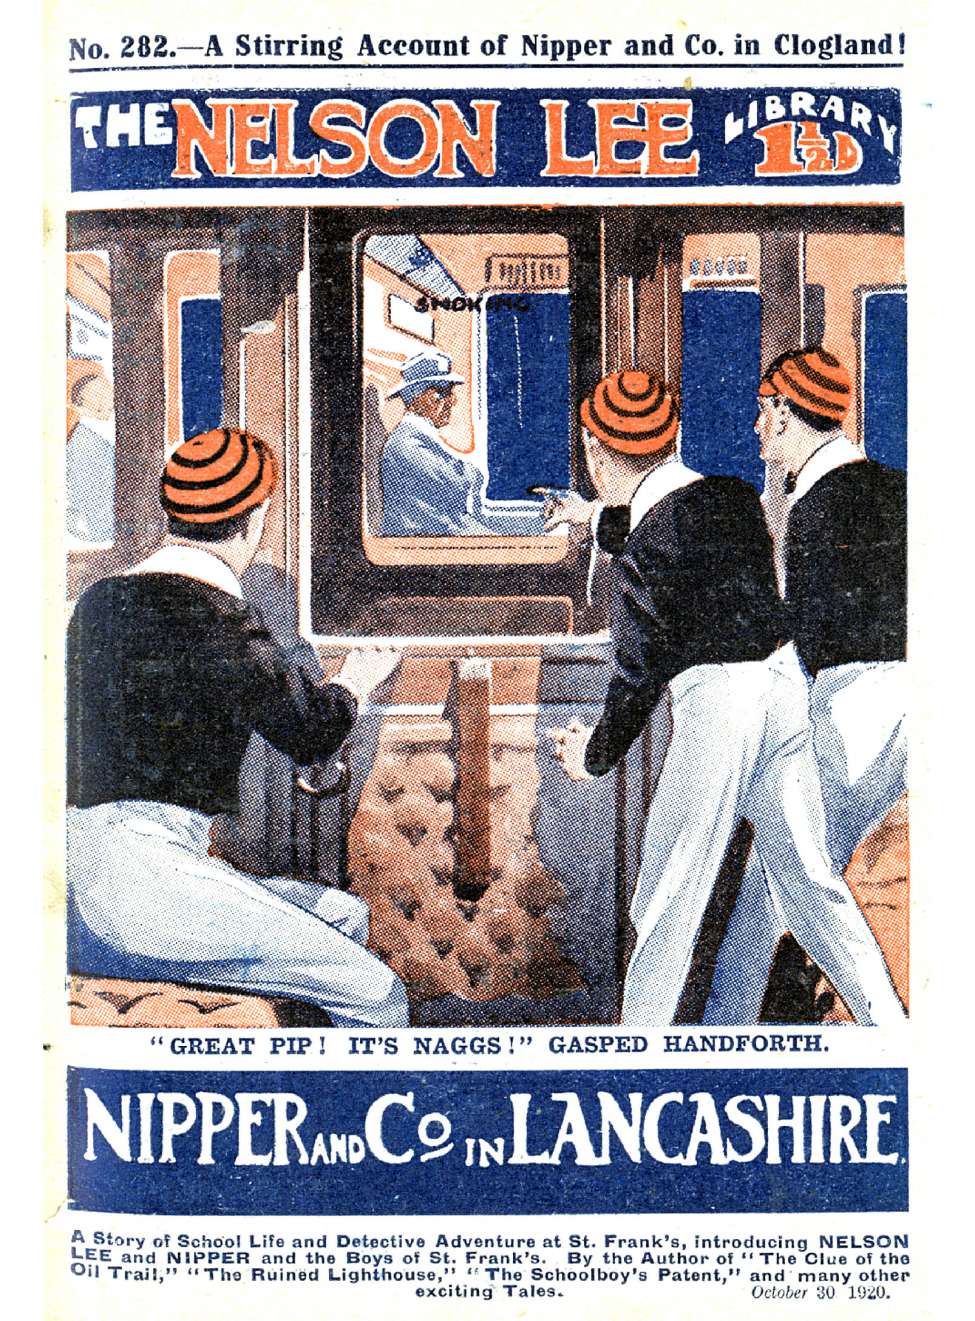 Book Cover For Nelson Lee Library s1 282 - Nipper & Co. in Lancashire